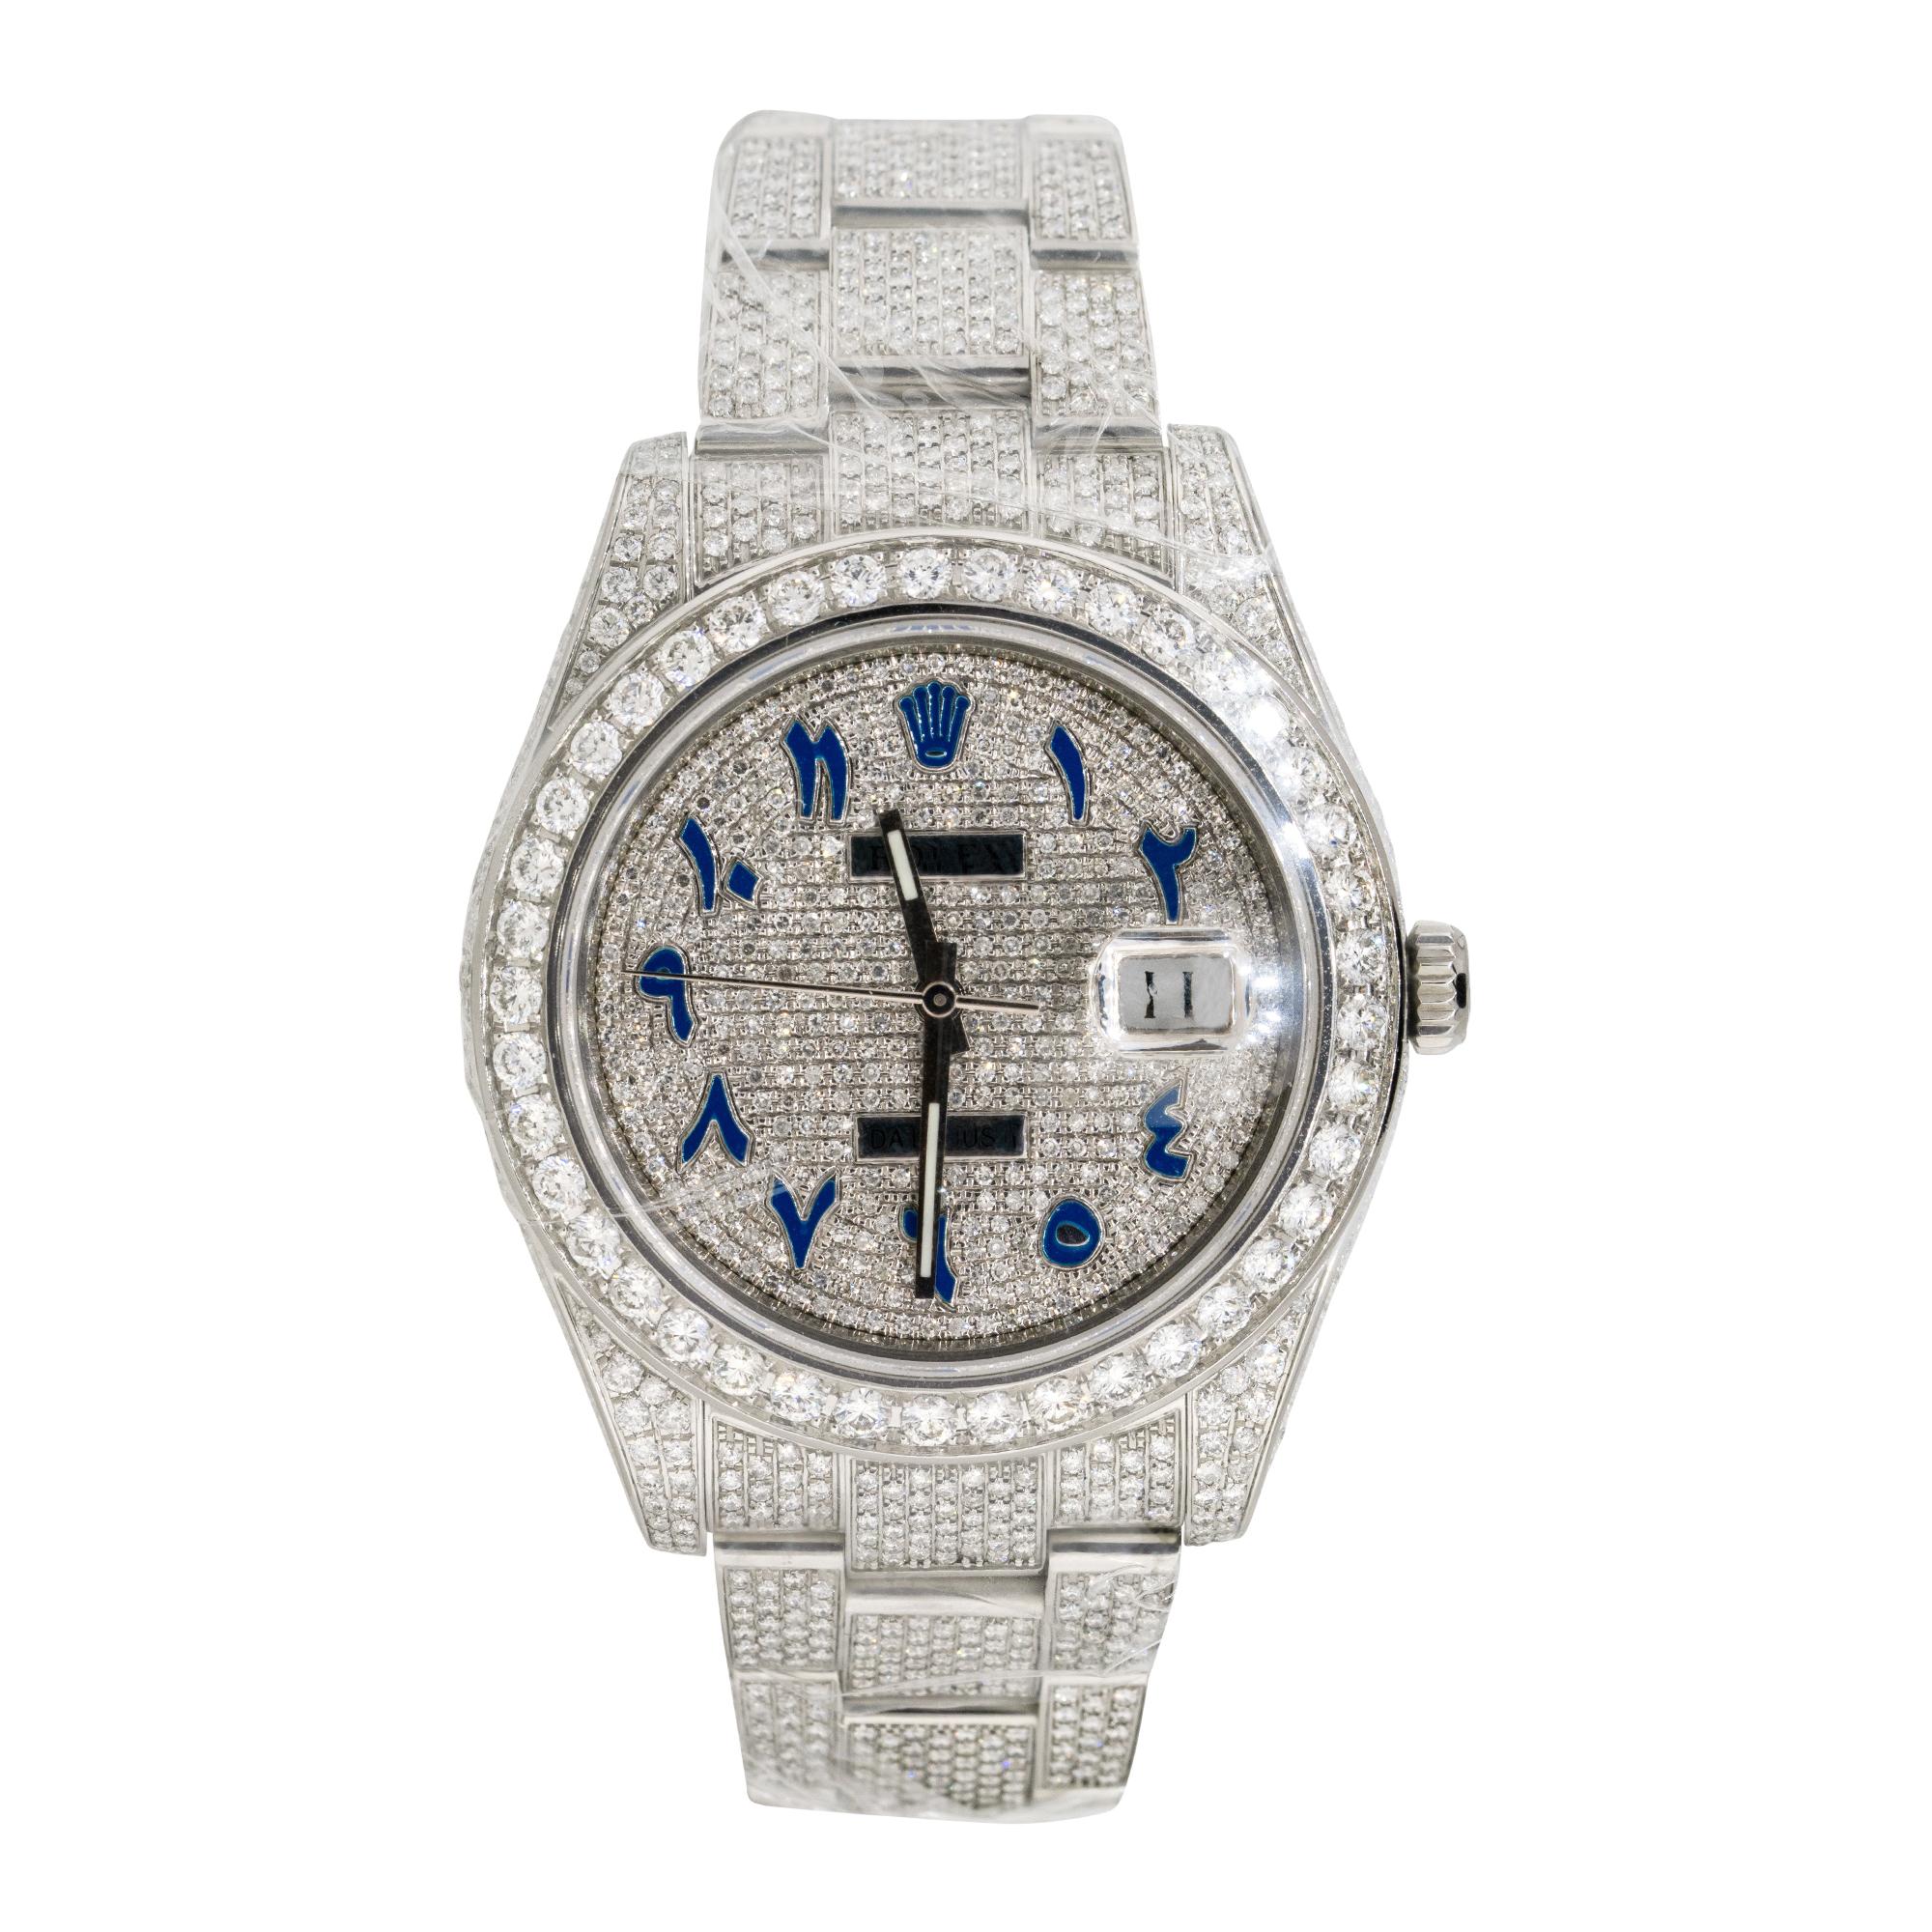 Brand: Rolex
MPN: 116334
Model: Datejust II
Case Material: Stainless steel with aftermarket Diamonds
Case Diameter: 41mm
Crystal: Sapphire Crystal
Bezel: Stainless steel bezel with aftermarket Diamonds
Dial: Dial with blue Arabic numerals covered in